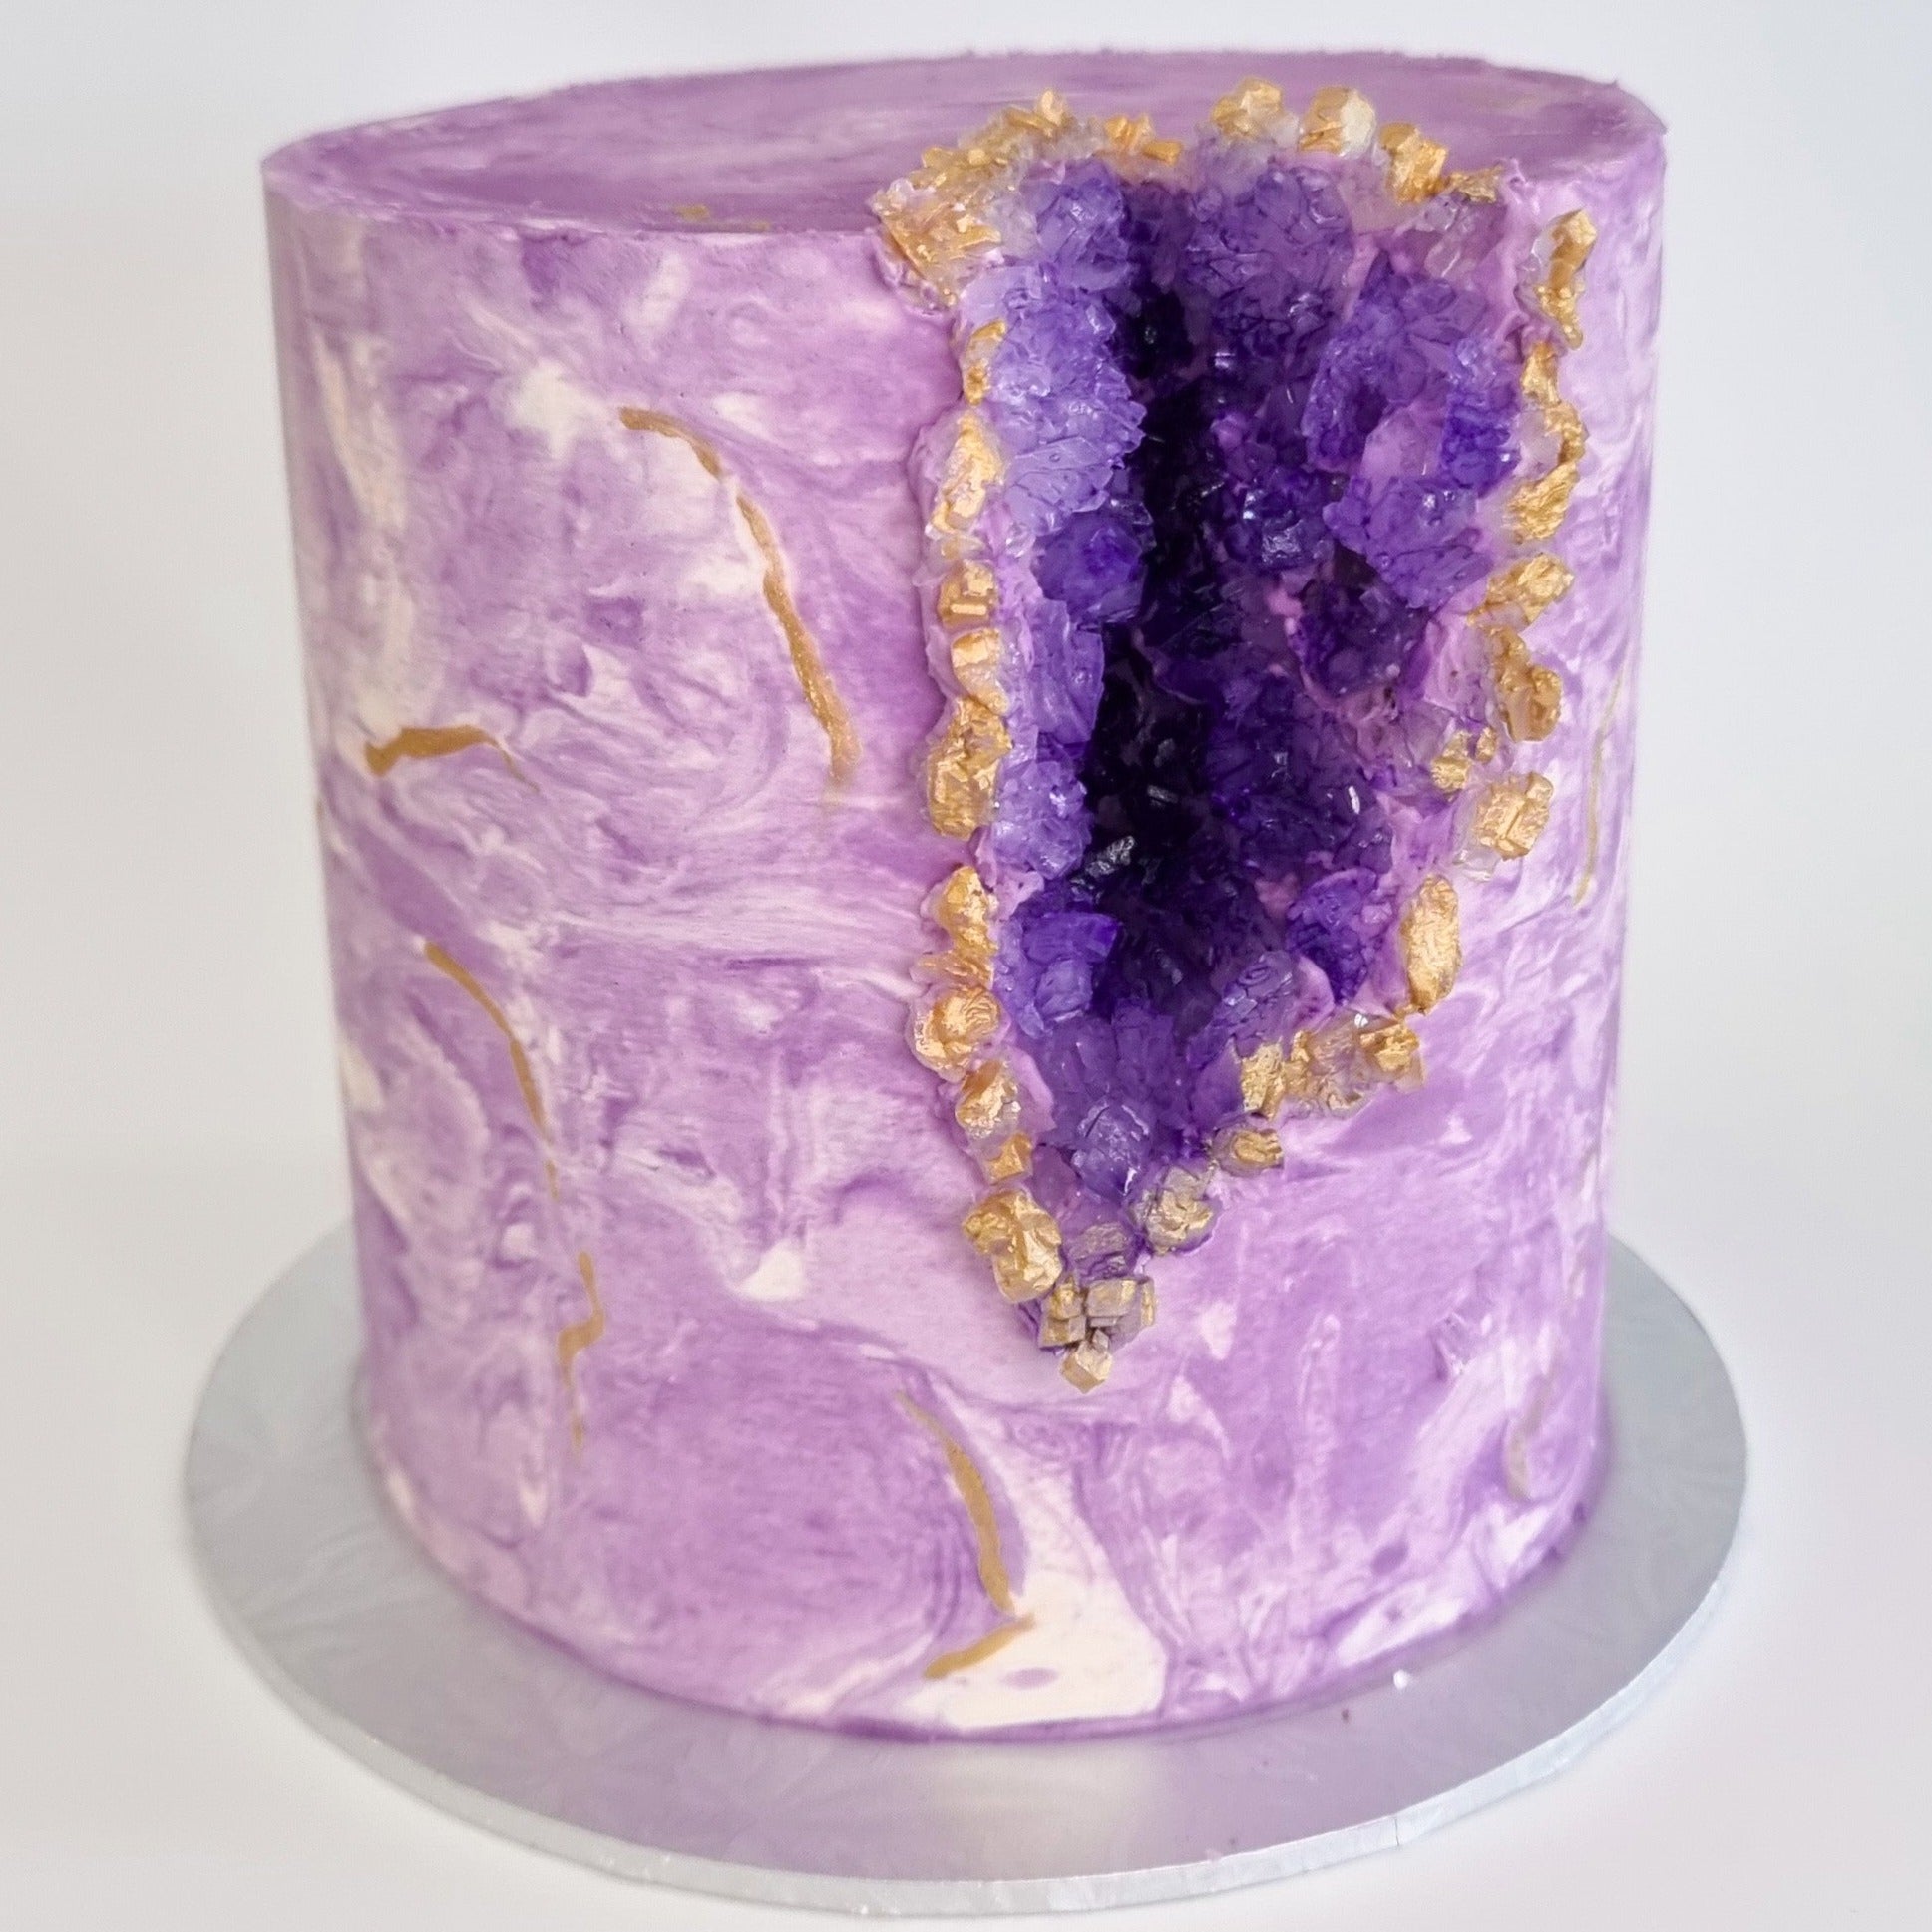 319 Likes, 2 Comments - Mudah.my (@mudahmy) on Instagram: “Geode cakes are  so trending right now, double-tap if you wanna bake the… | Geode cake,  Crumble cake, Cake